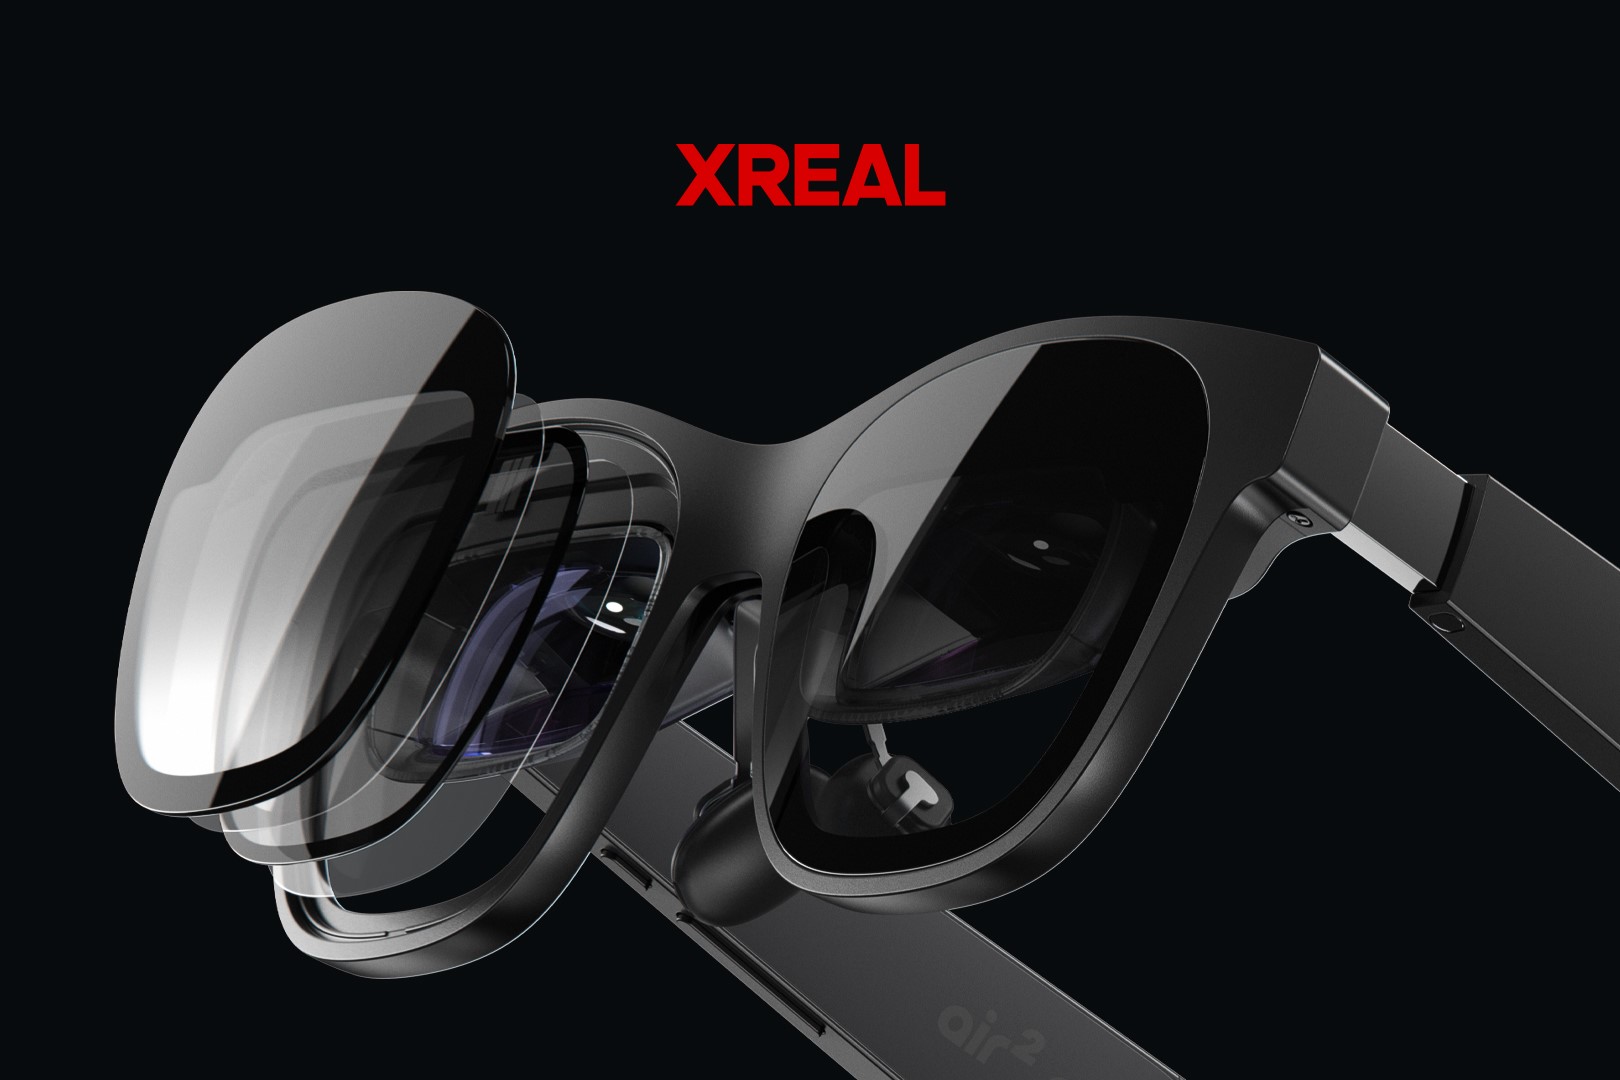 Xreal Air 2 Ultra Hands-On: These Glasses Put Screens All Around You - CNET